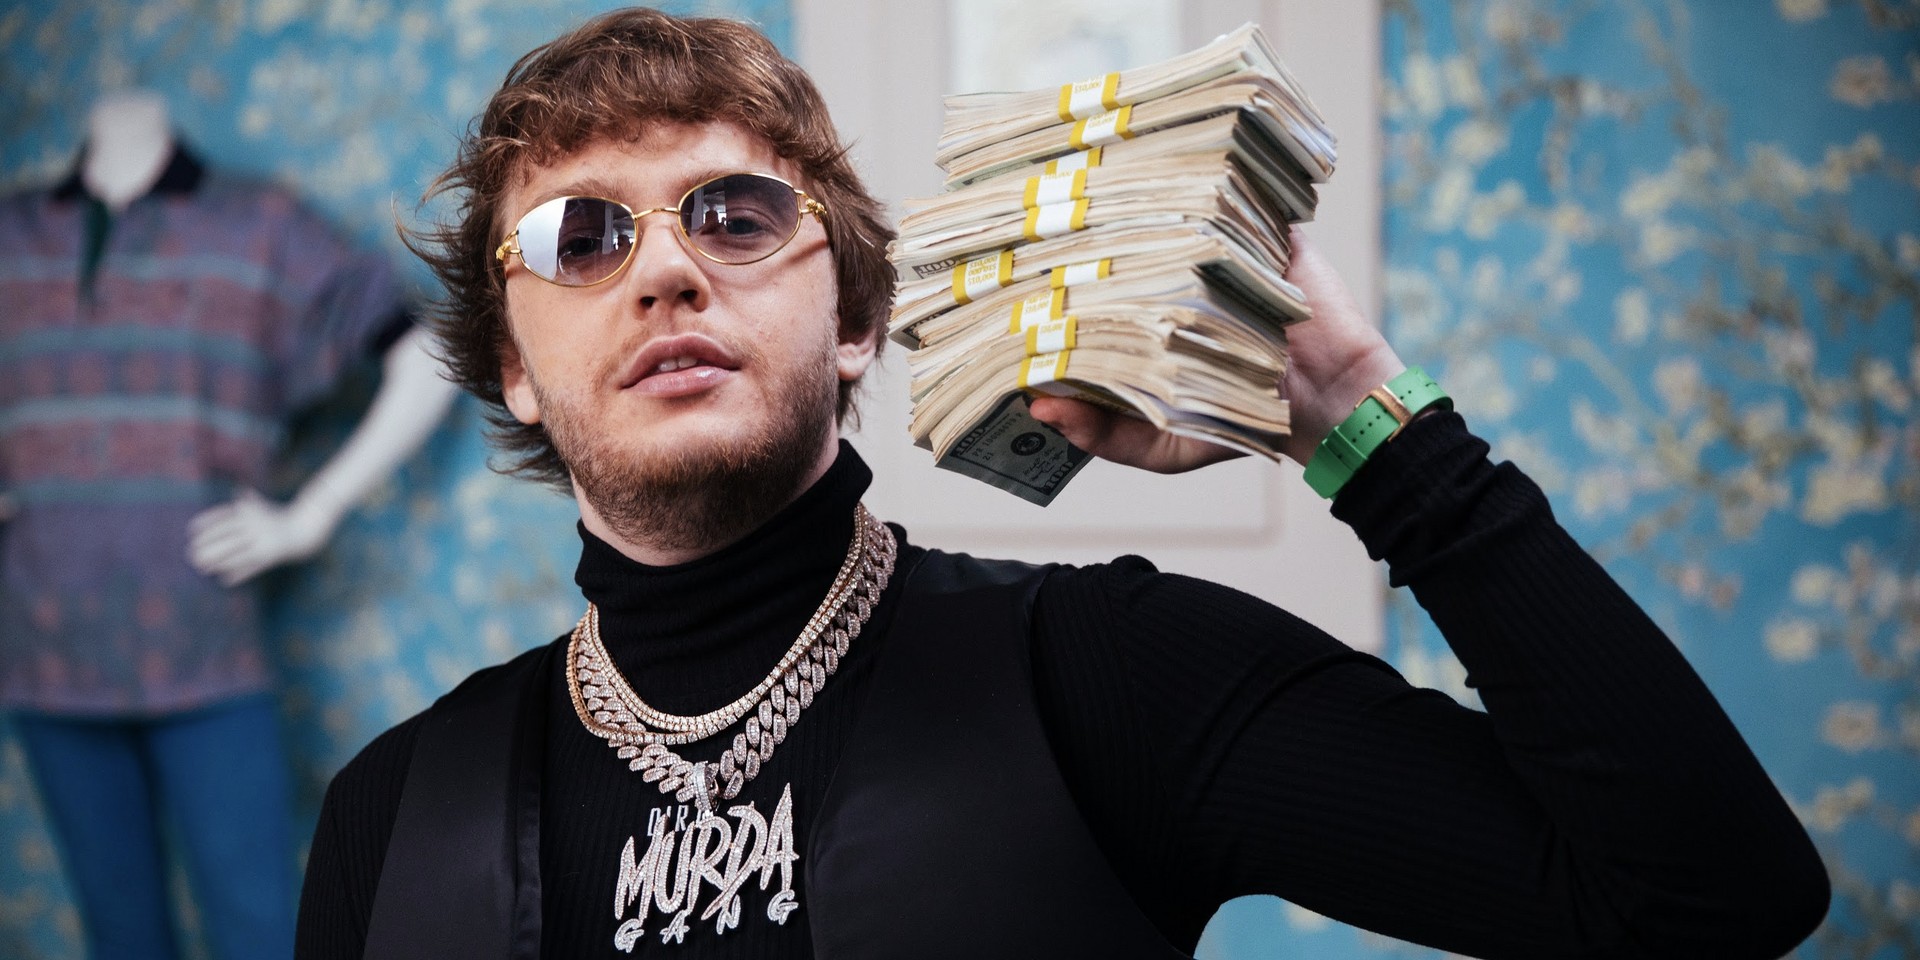 Murda Beatz, Lil Pump and Sheck Wes go on an insane shopping spree in new music video – watch